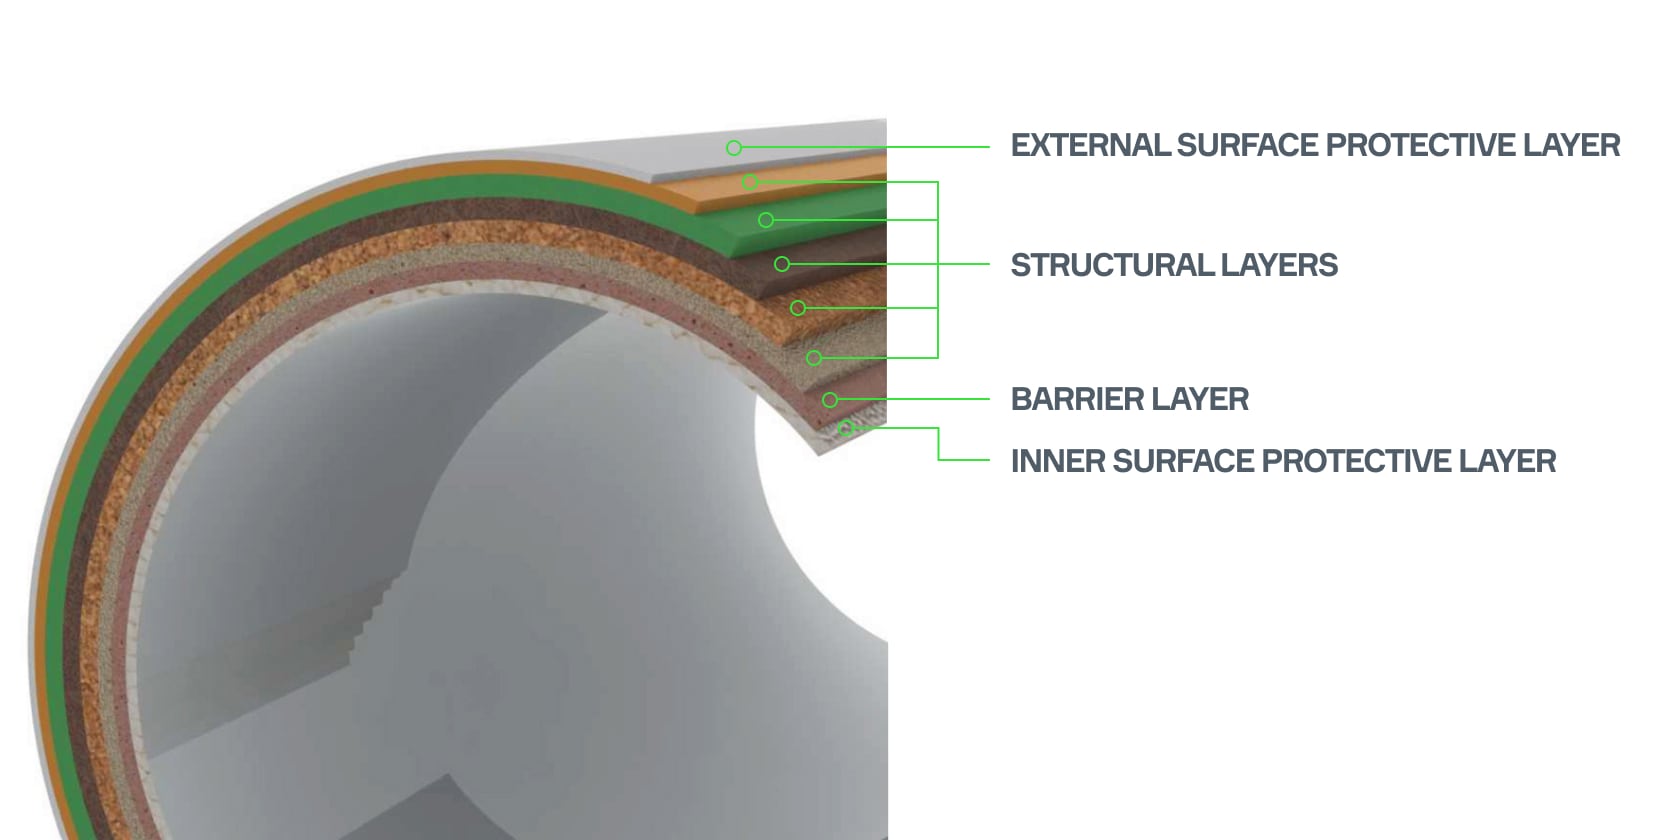 A cross section of the SUPERLIT pipe including external and internal protective layers